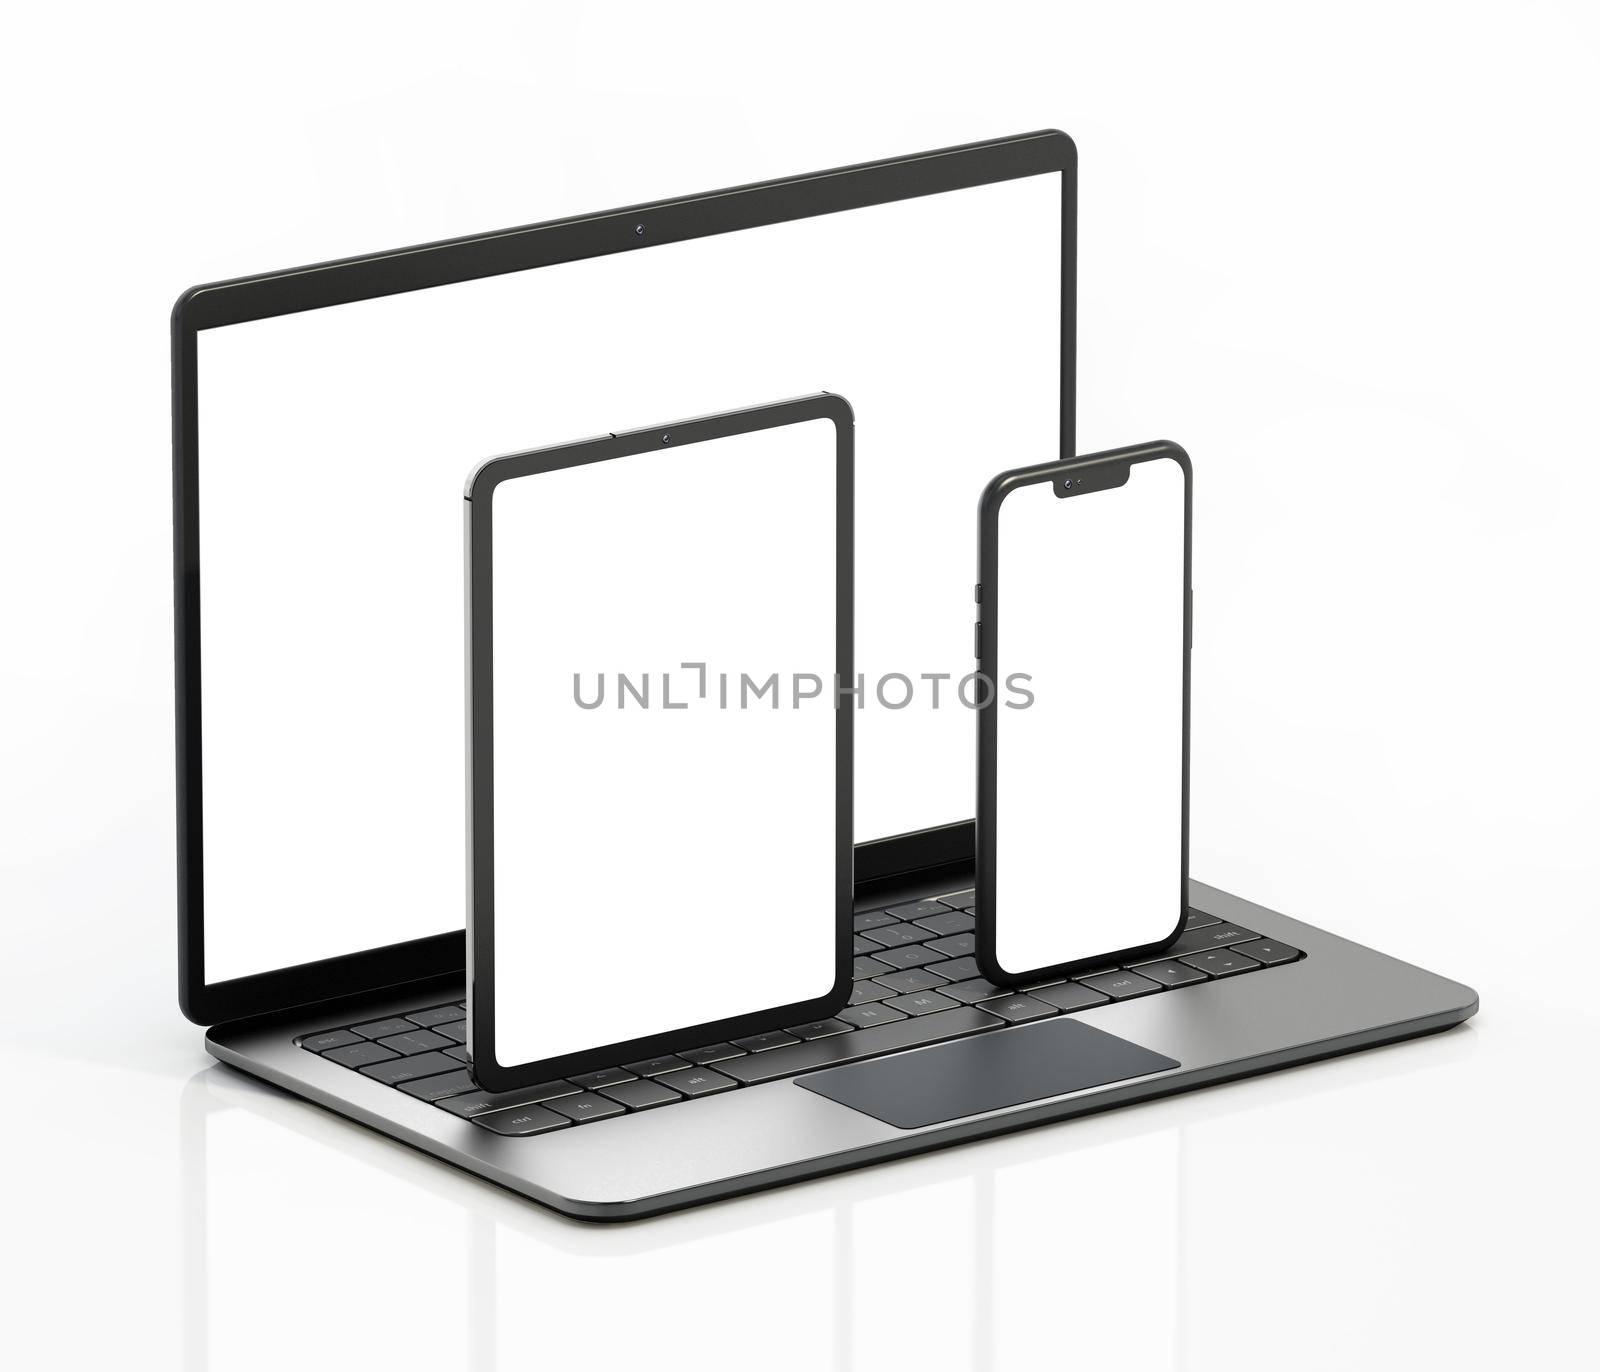 Laptop computer, smartphone and tablet computer isolated on white background. 3D illustration.